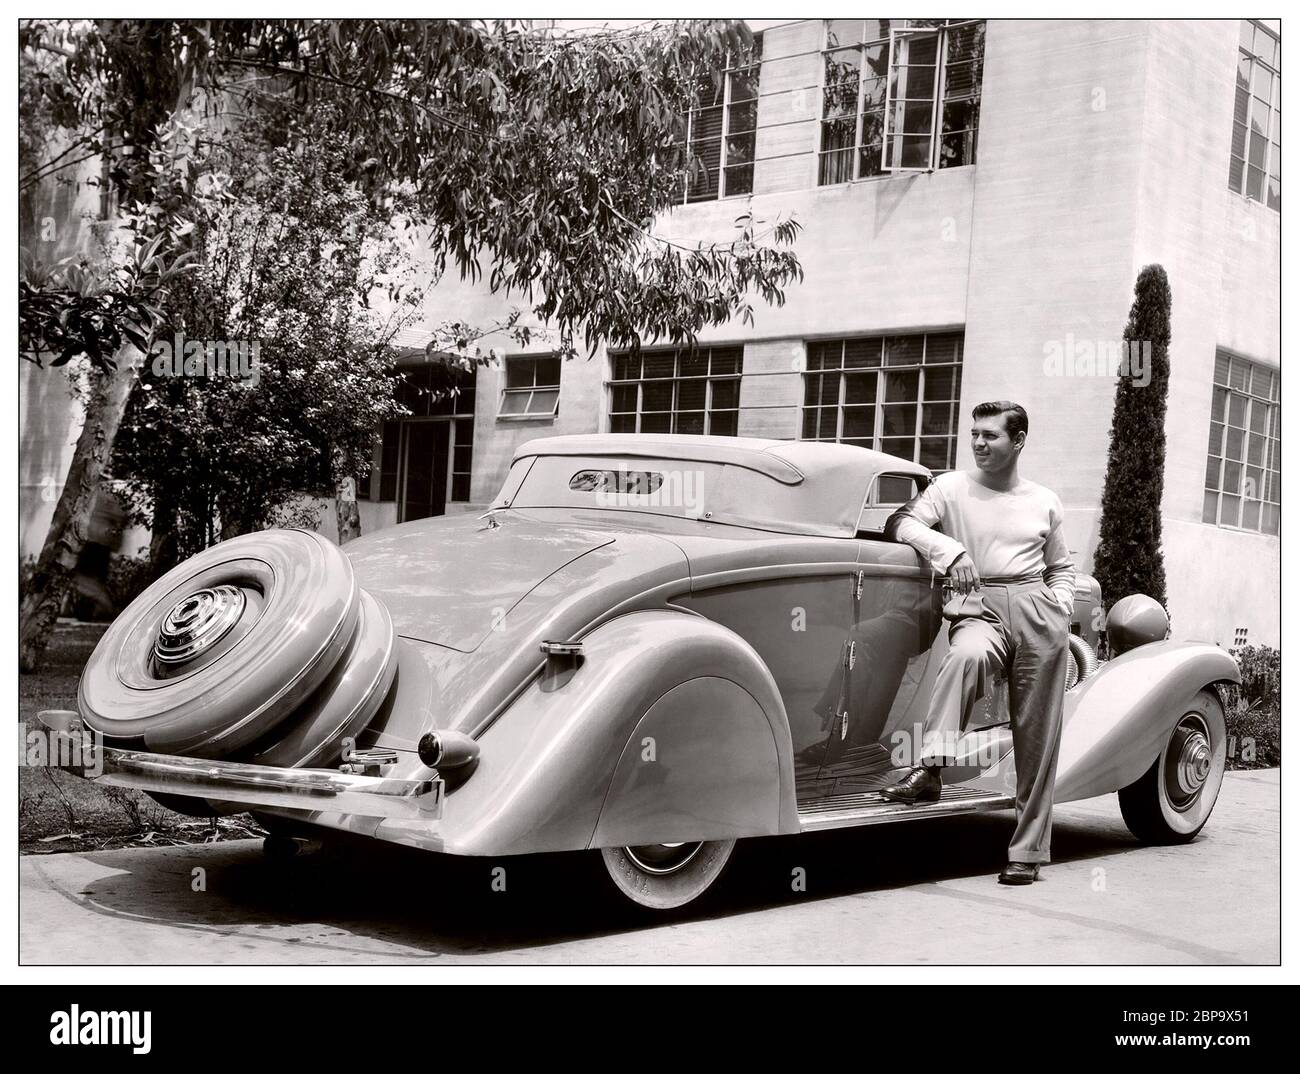 Clark Gable 1930’s Archive Image with Duesenberg JN 560/2585 Convertible Coupe SWB by Bohman & Schwartz, & Clark Gable This car was purchased in 1935 by Clark Gable and was originally bodied by Rollston as a convertible coupe. It was restyled by Bohman & Schwartz of Pasadena, CA, to sketches created to reflect ideas and shapes suggested by Gable himself. It was used by Gable during his courtship of Carole Lombard, and was frequently used during their marriage, then abandoned by Gable after her untimely death in 1942. Stock Photo